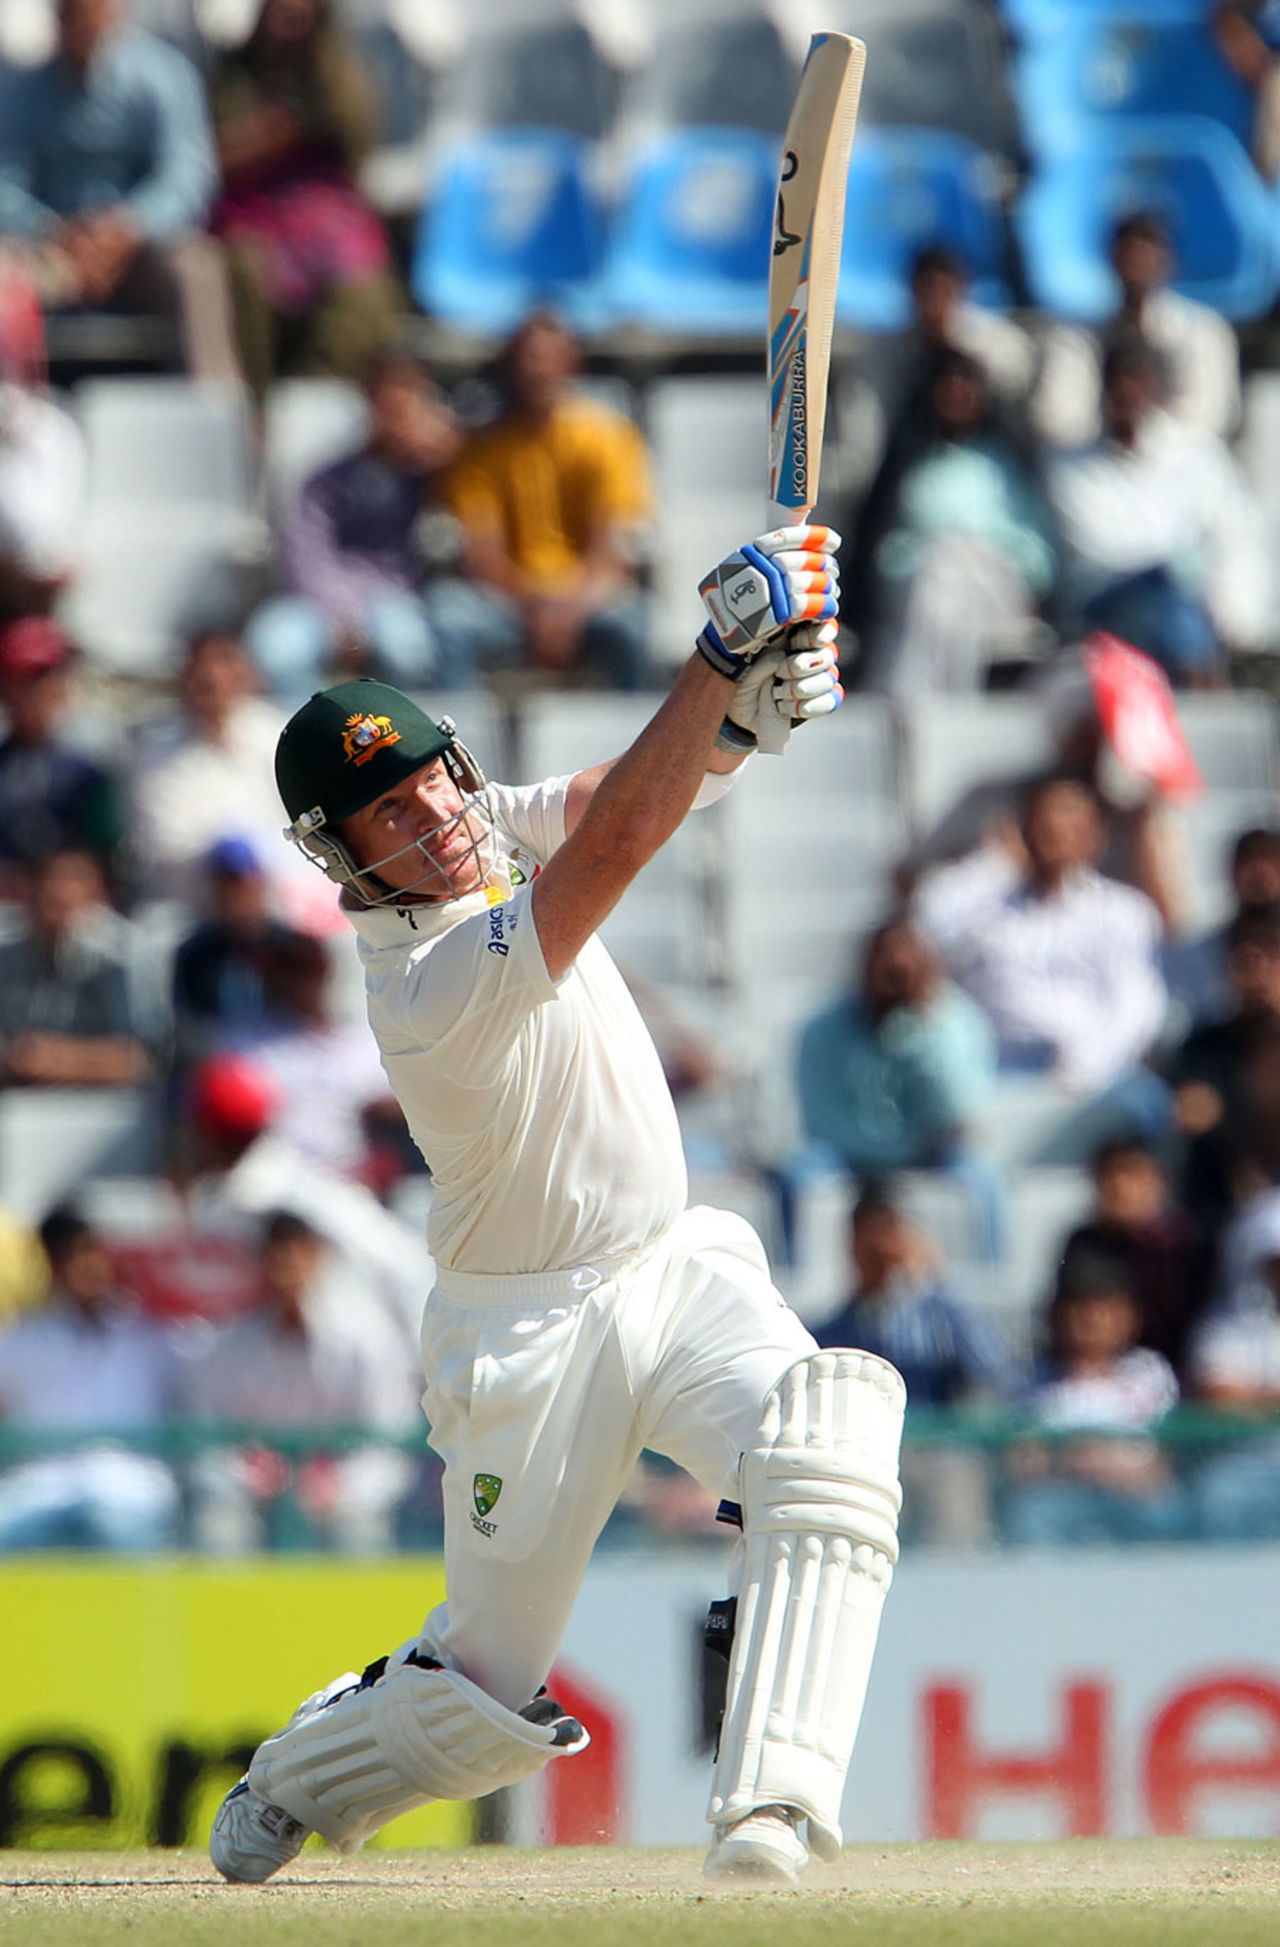 Brad Haddin plays an expansive shot during his innings of 30, India v Australia, 3rd Test, 5th day, Mohali, March 18, 2013, 